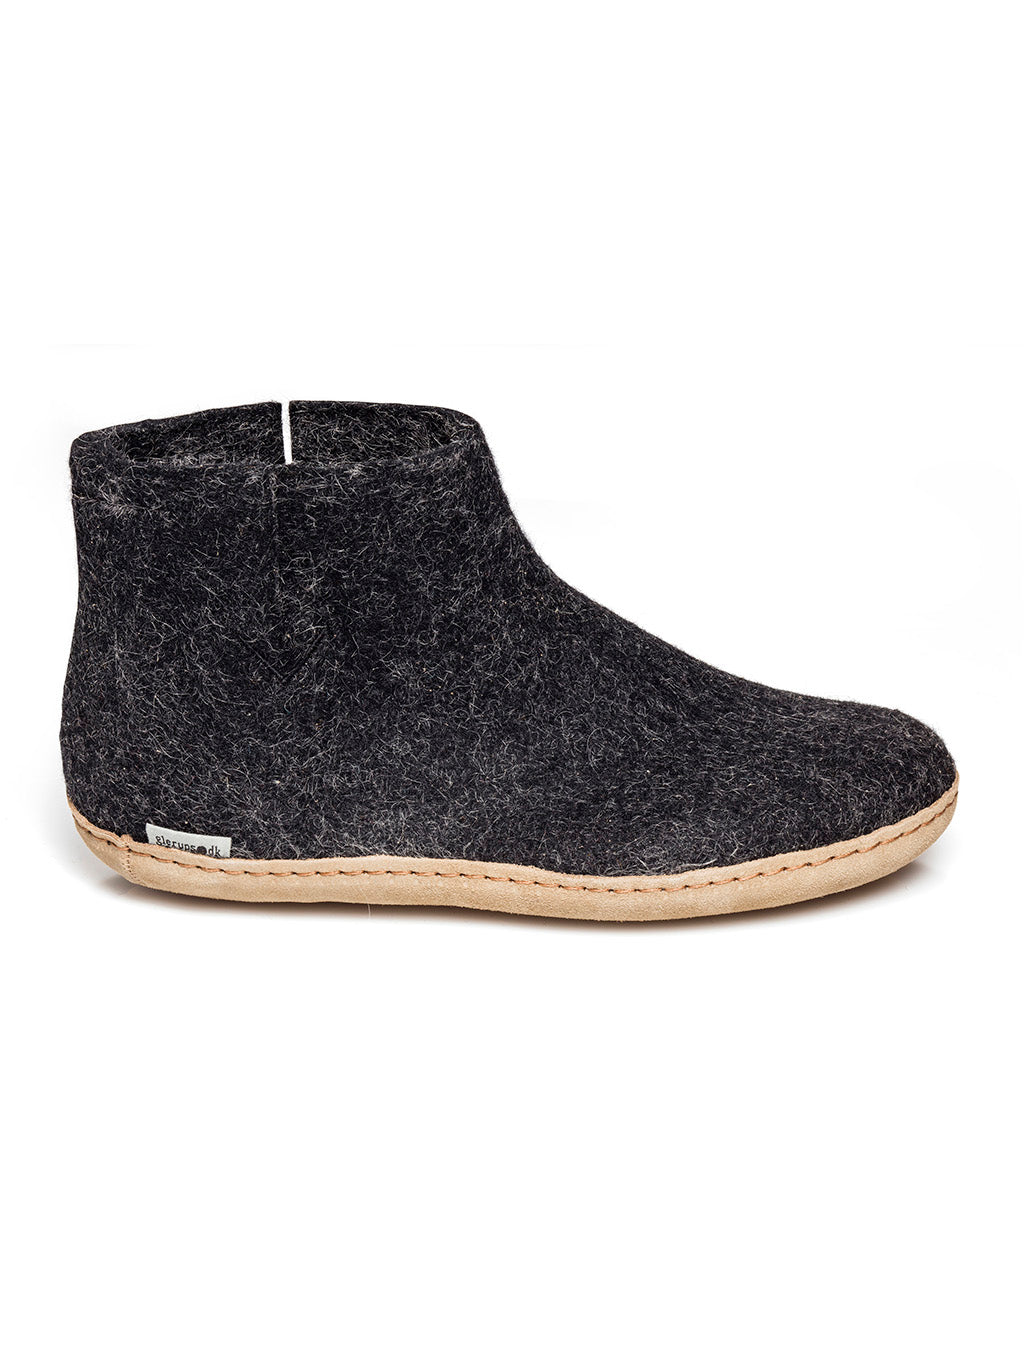 Slipper black-charcoal wool with leather sole